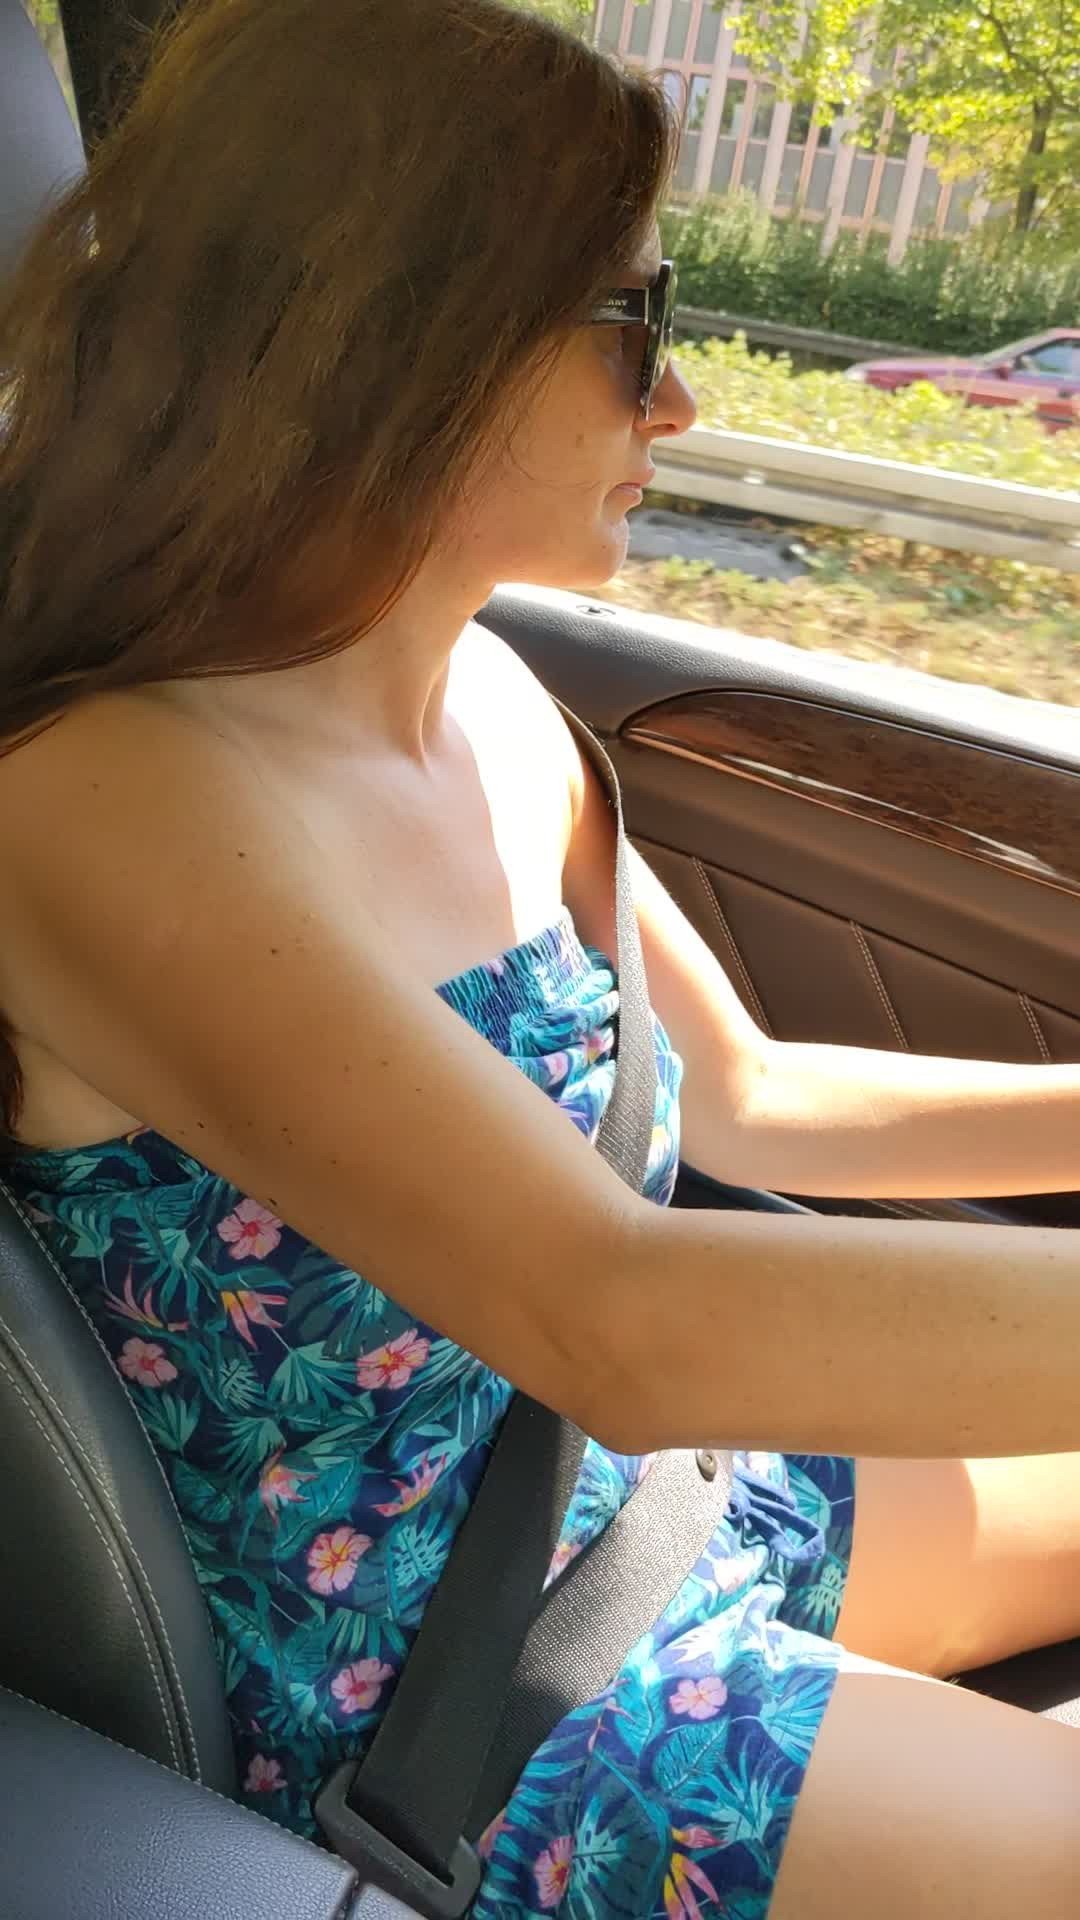 Video by HotwifeHunny with the username @HotwifeHunny, who is a star user,  July 23, 2022 at 12:02 PM. The post is about the topic MILF and the text says 'Just driving around 😅 Could I catch your attention? 39yo'